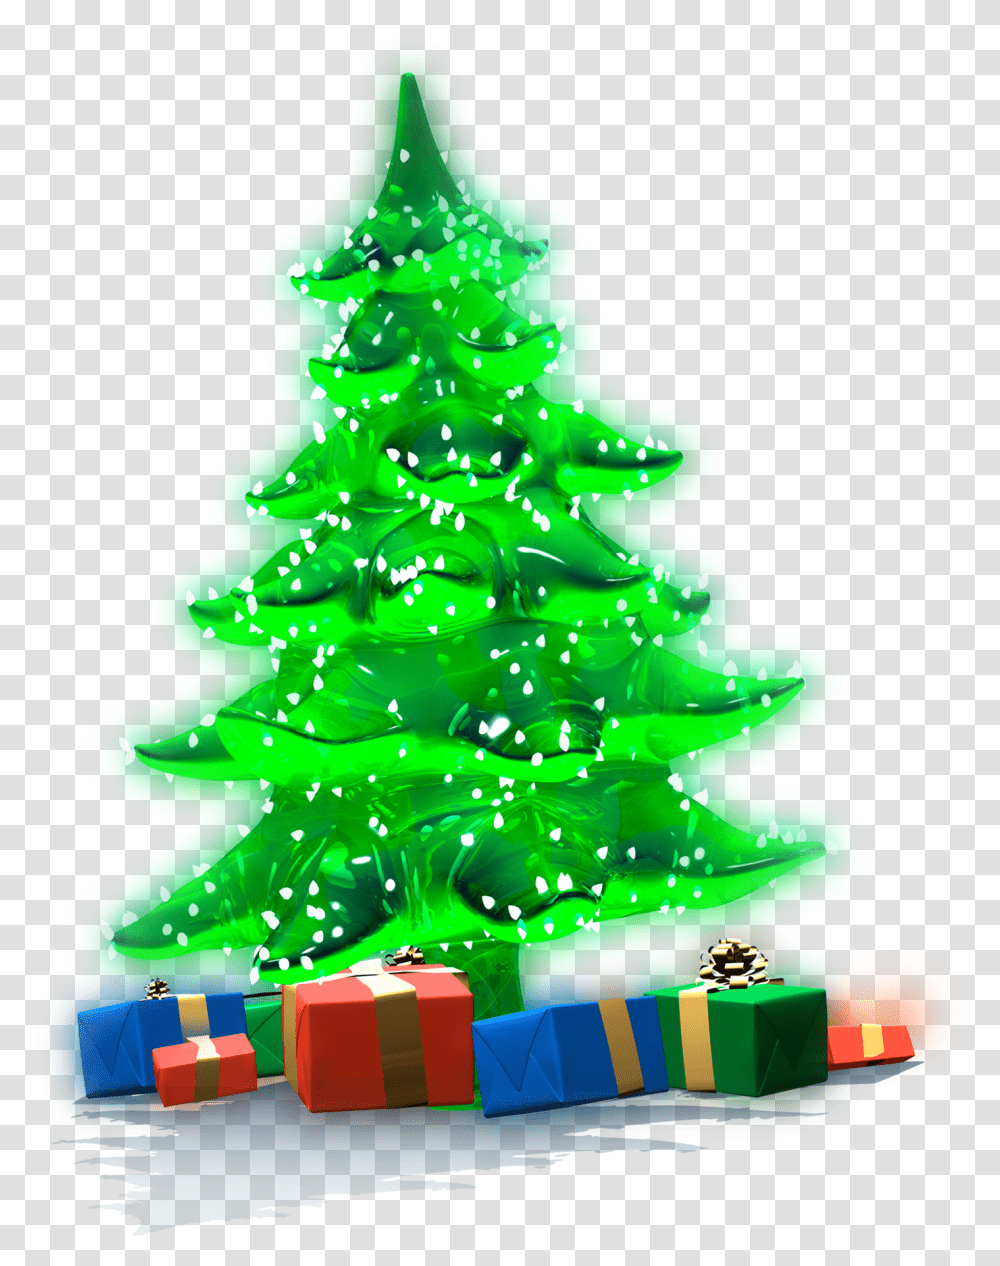 Luminous Christmas Tree With Gifts Clipart Gifts Under Christmas Tree, Plant, Ornament, Wedding Cake, Dessert Transparent Png